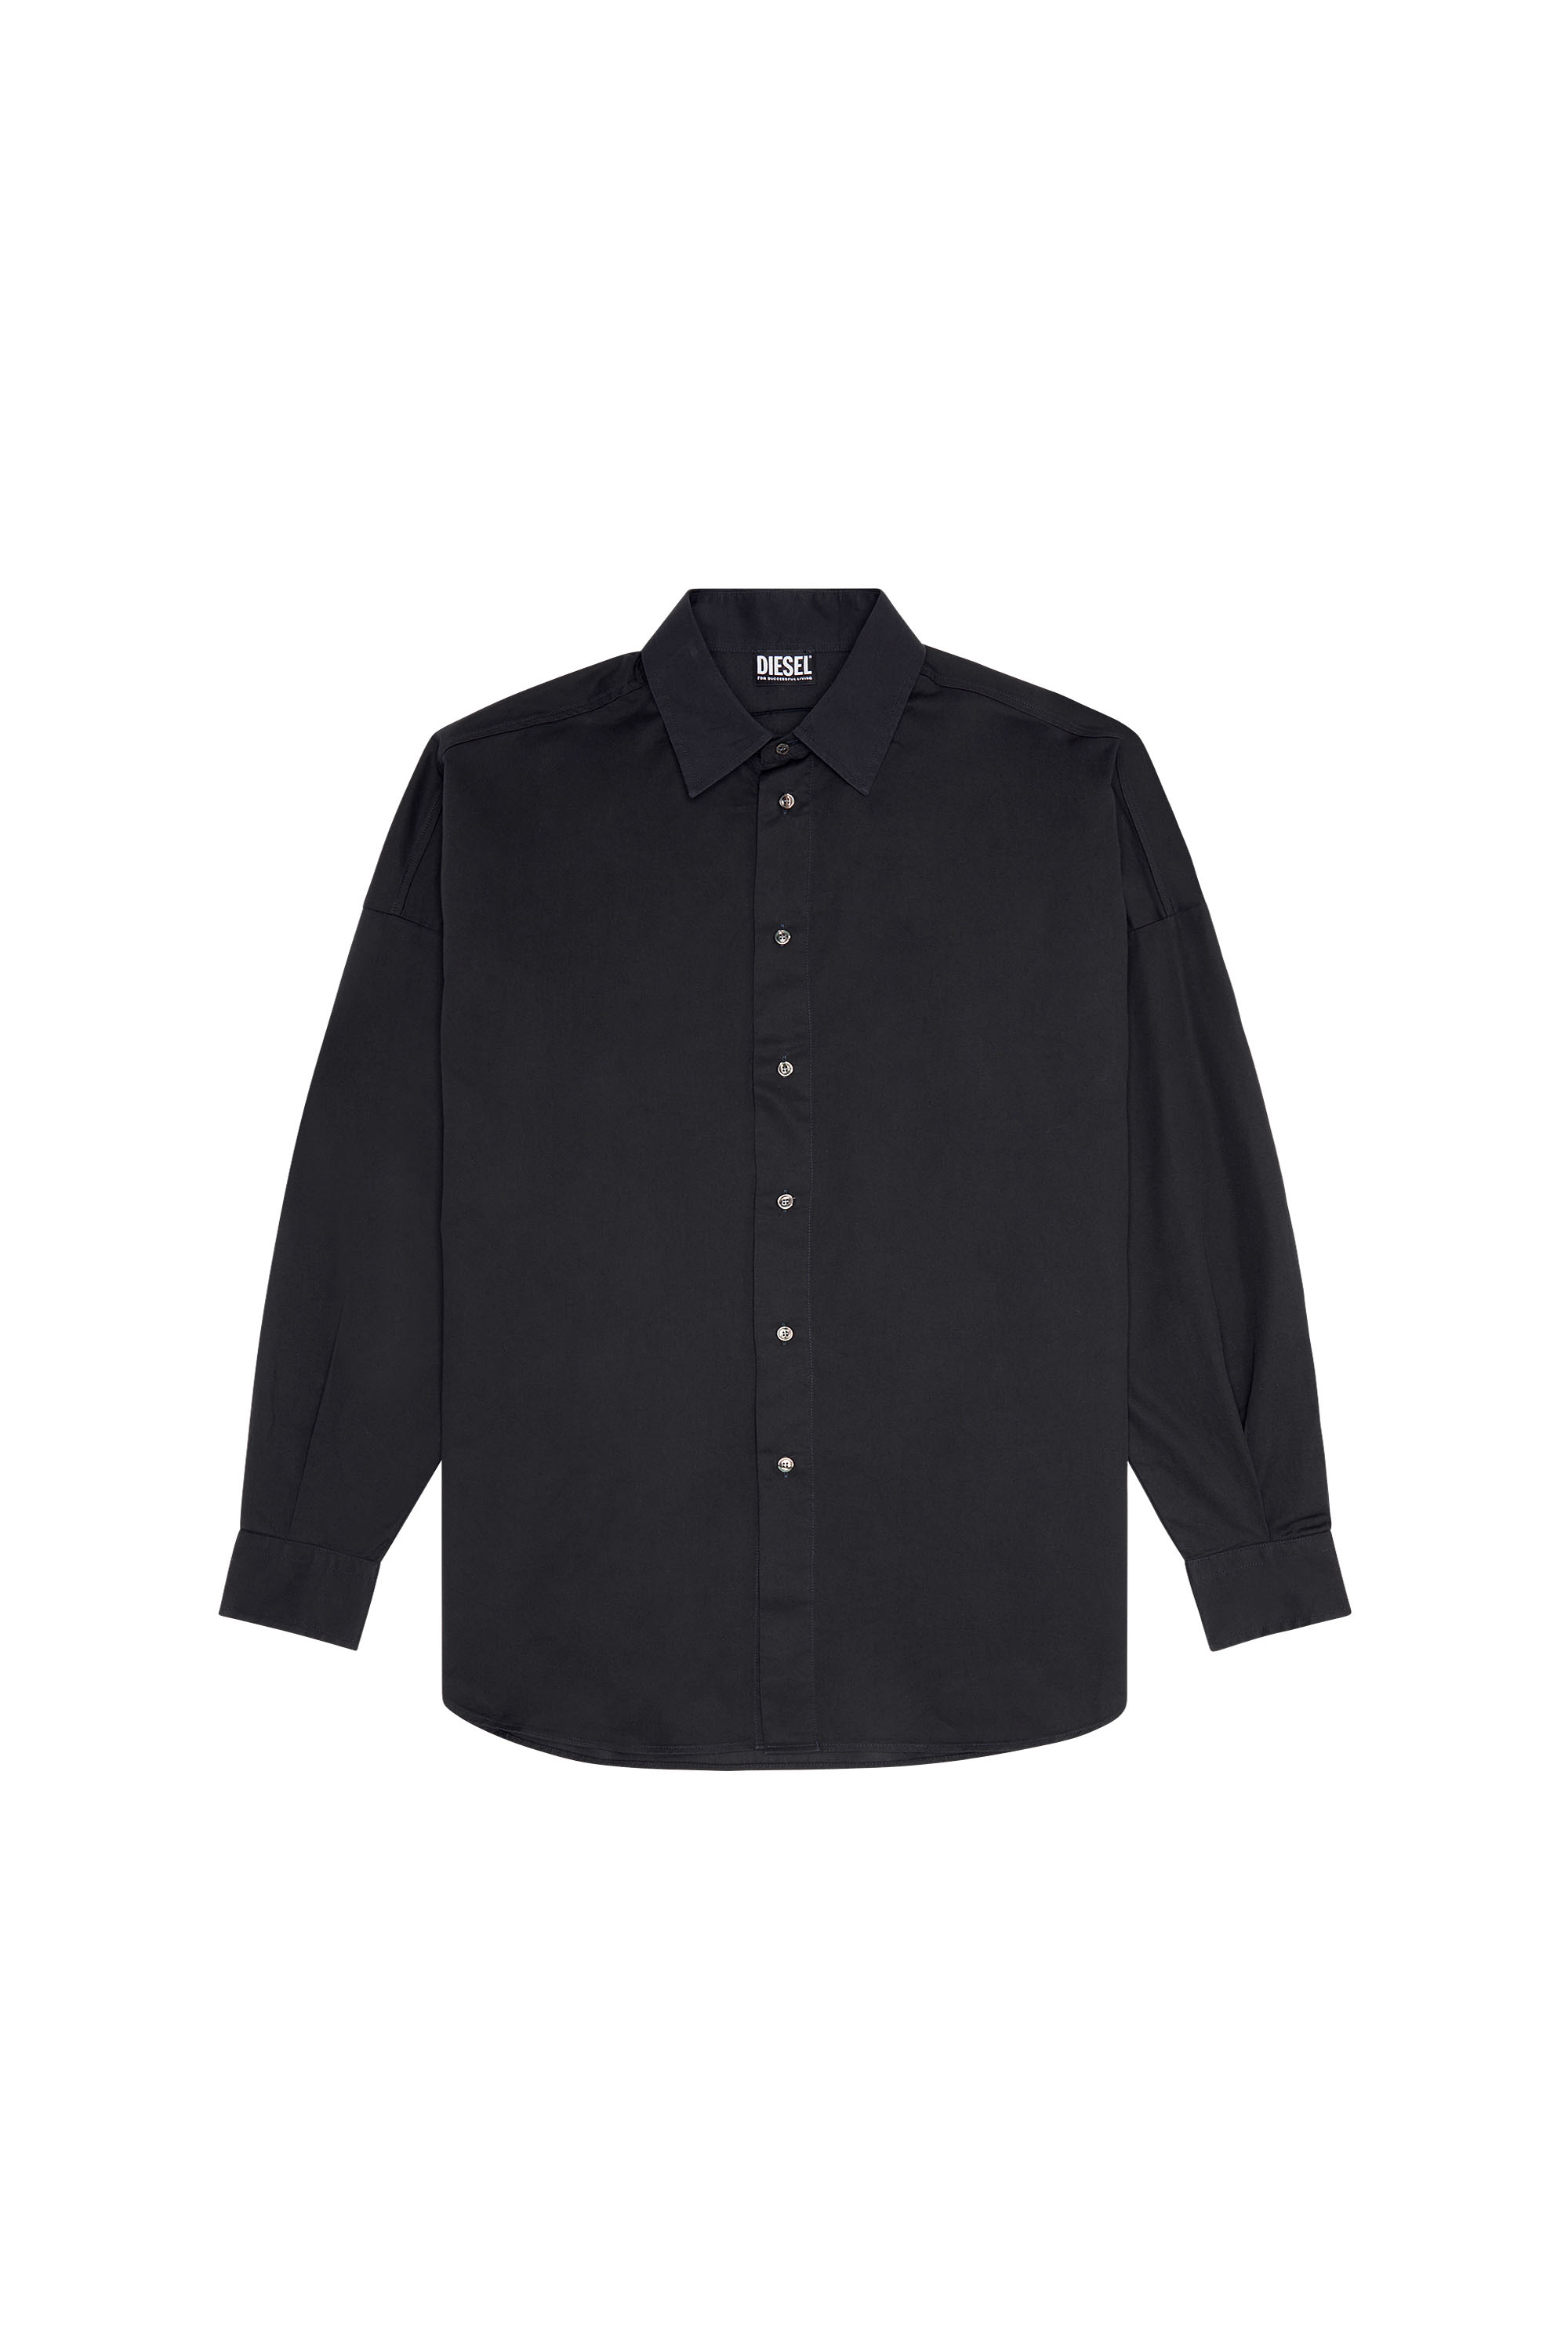 Diesel - S-LIMO-LOGO, Man Shirt with maxi logo embroidery in Black - Image 3